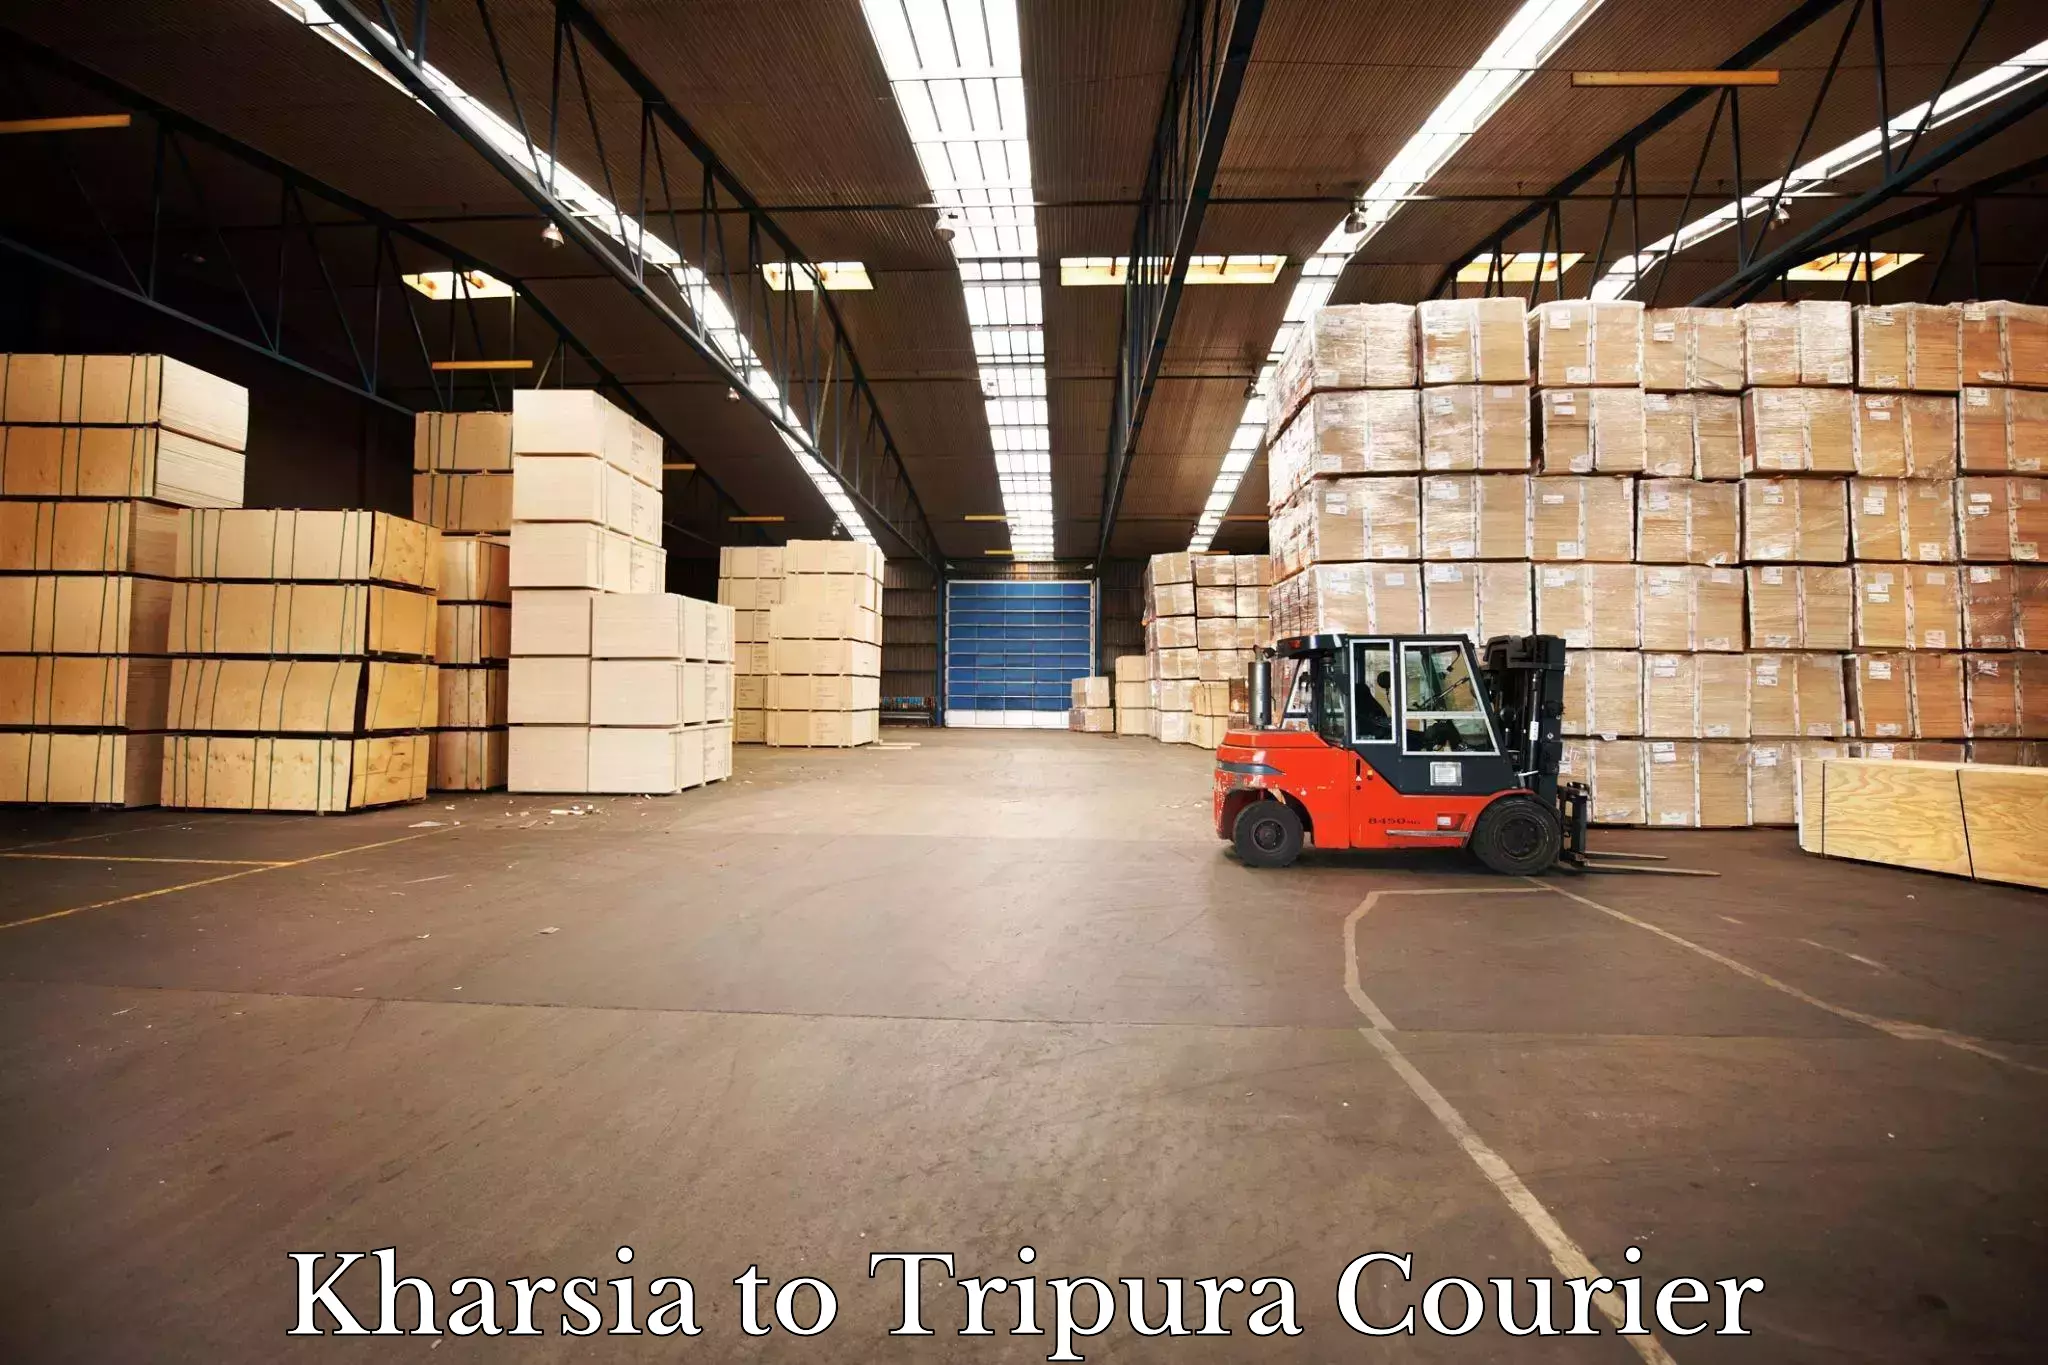 Next-day delivery options in Kharsia to Tripura